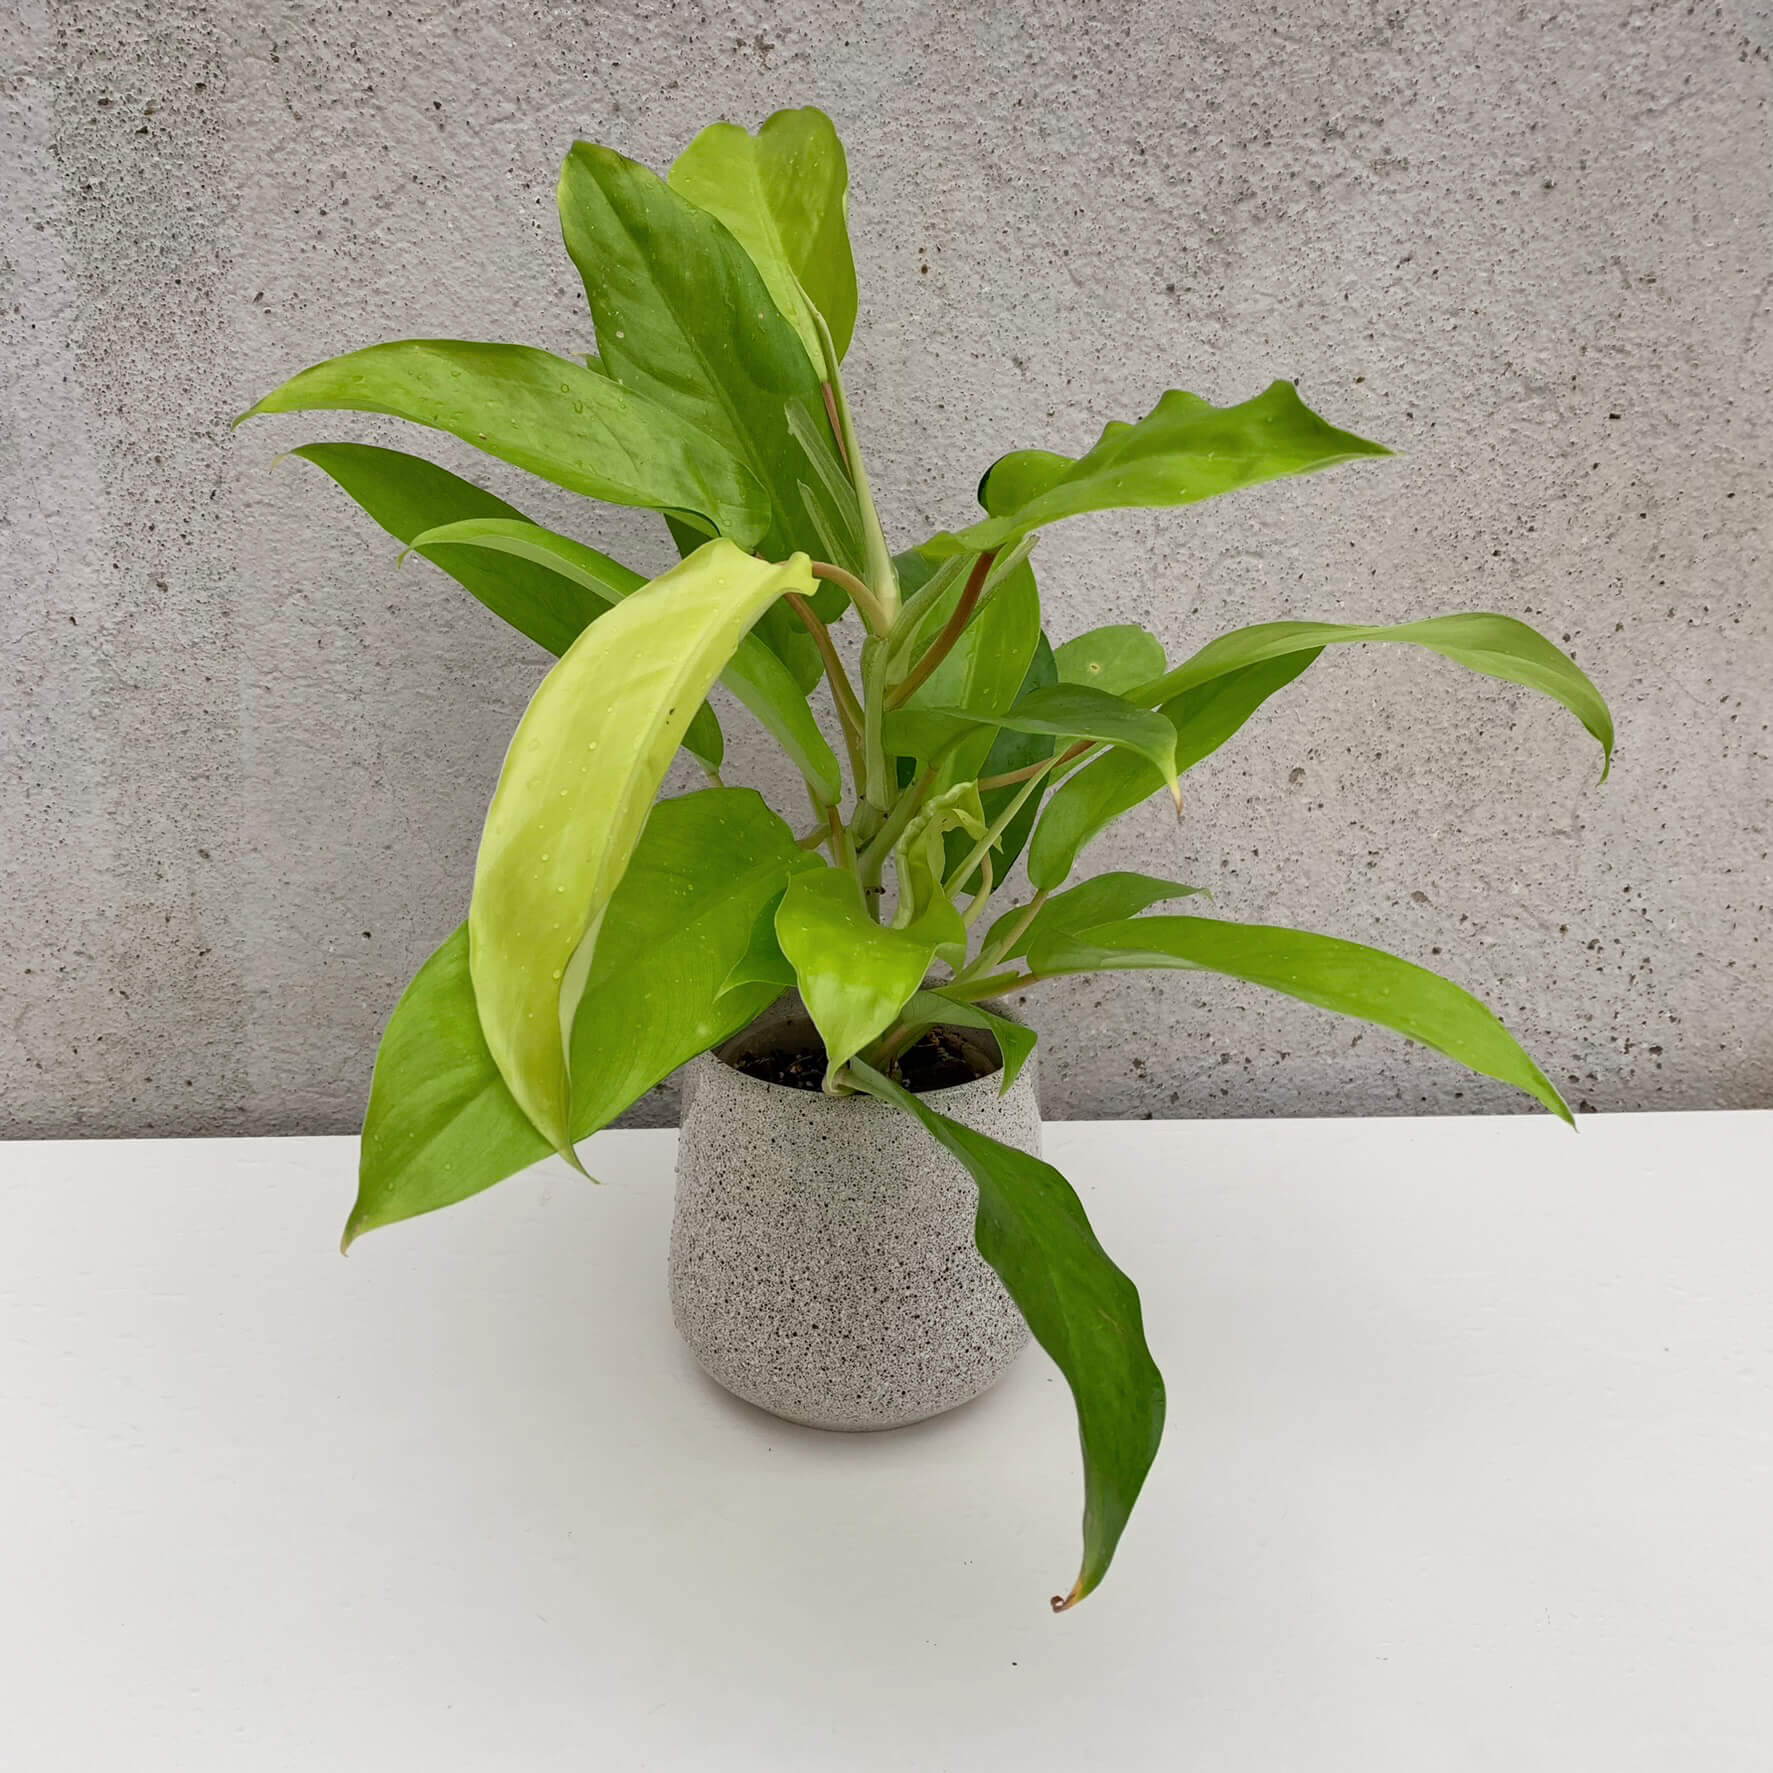 Recent order of philodendron and epipremnum from Thailand had this